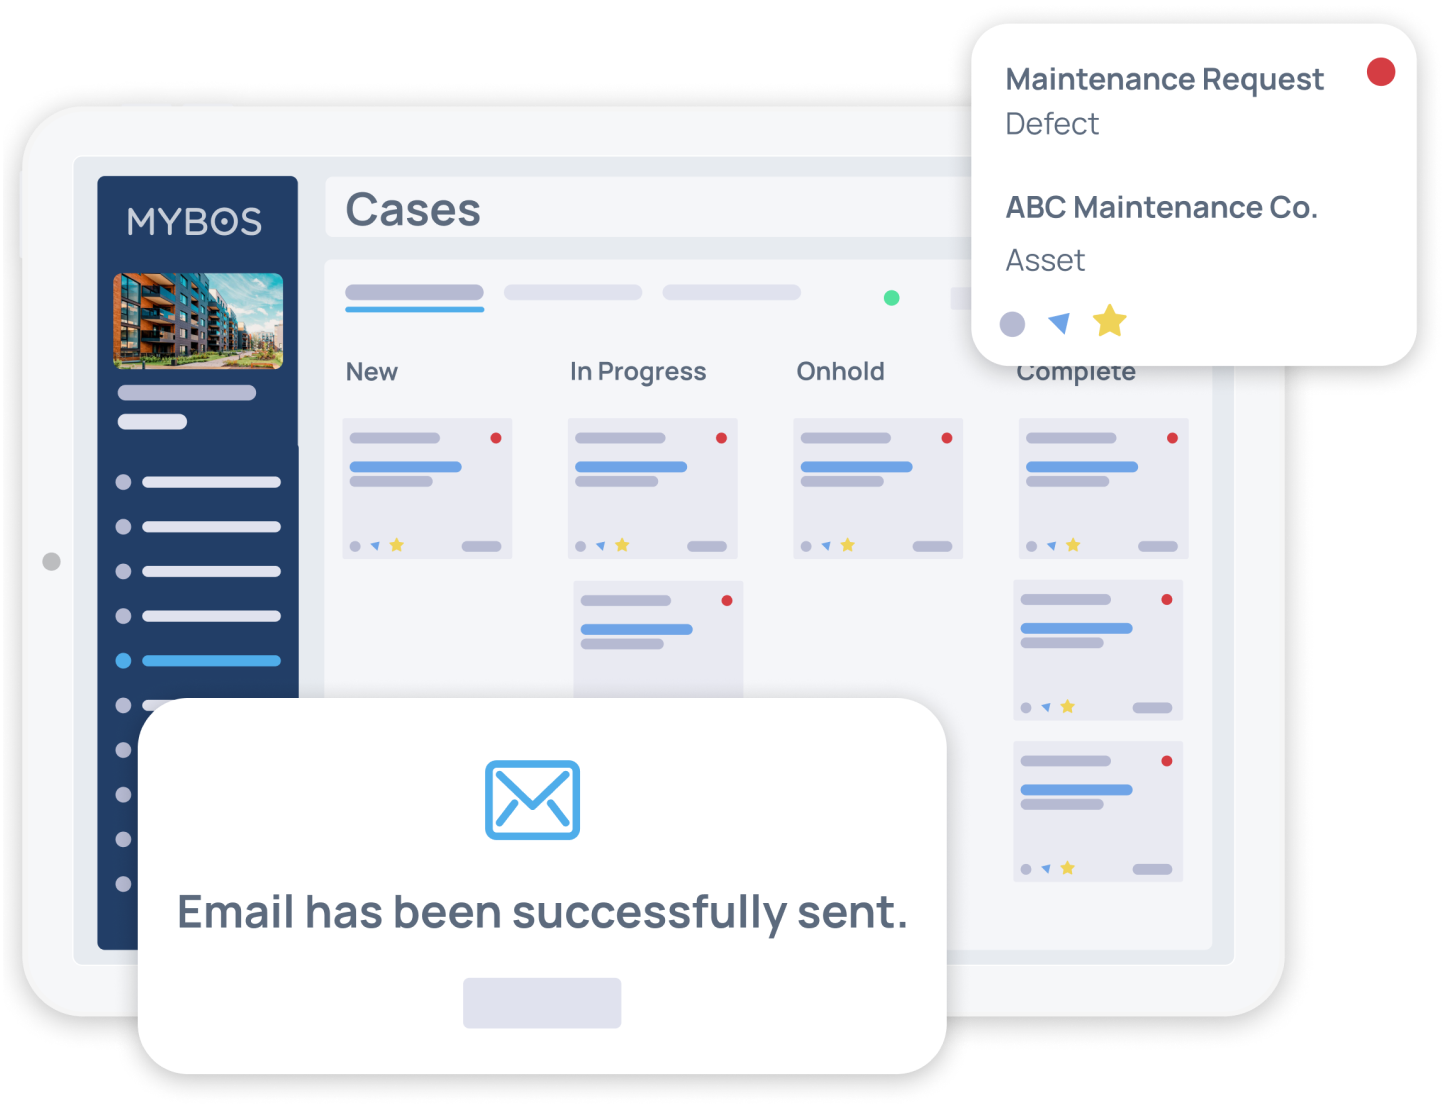 The Cases feature allows for Building/Facility Managers to manage work orders, review maintenance requests and plan for preventative maintenance